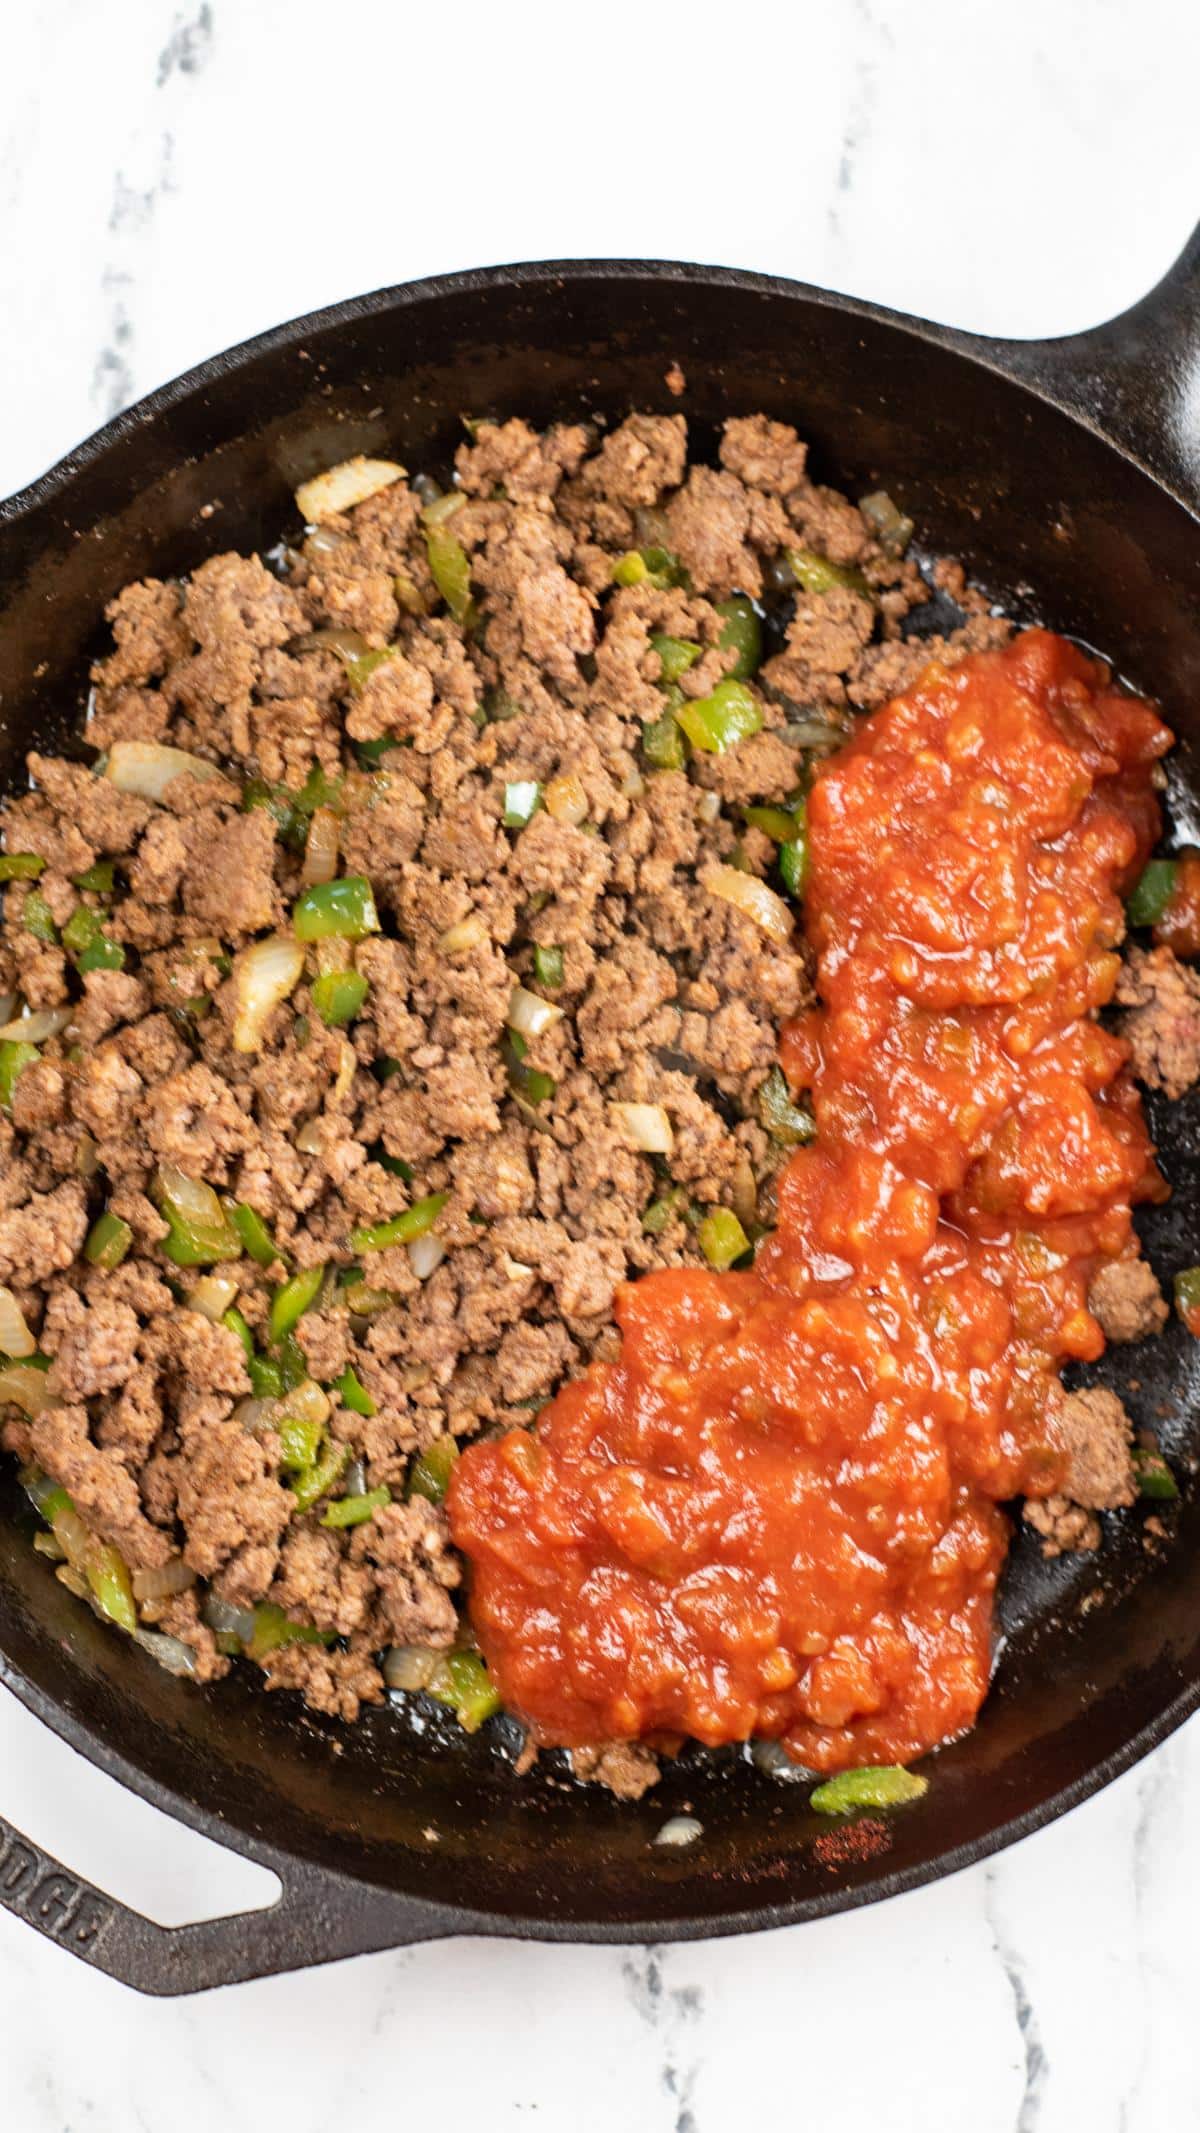 Cooked meat mixture with salsa added to pan.